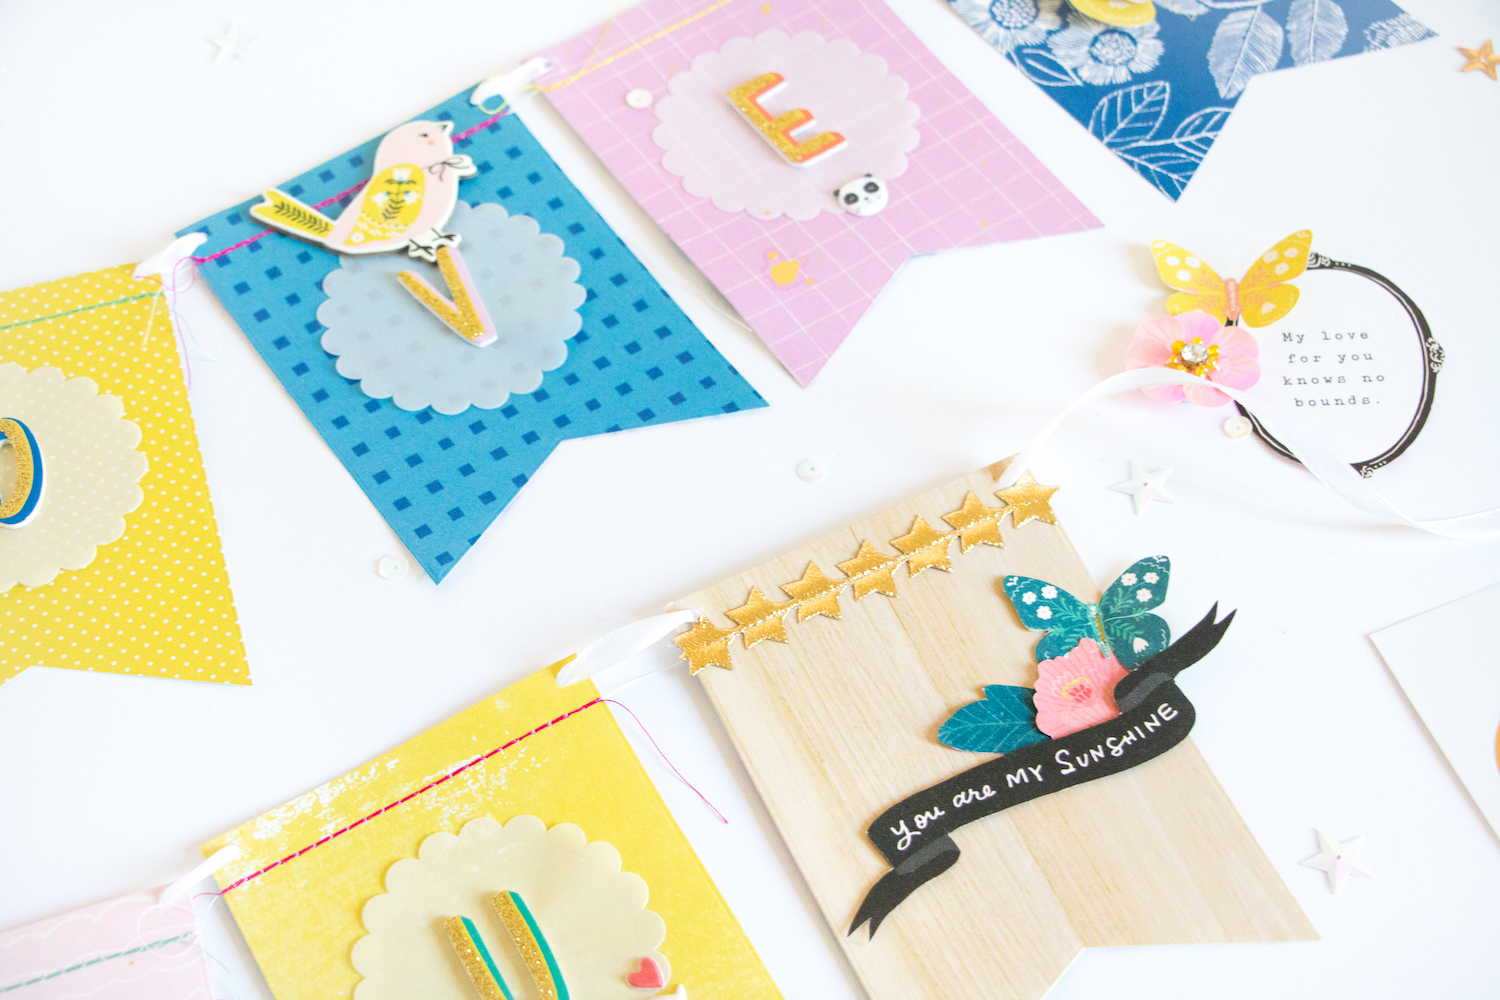 Mini Album Banner by ScatteredConfetti. // #scrapbooking #cratepaper #maggieholmes